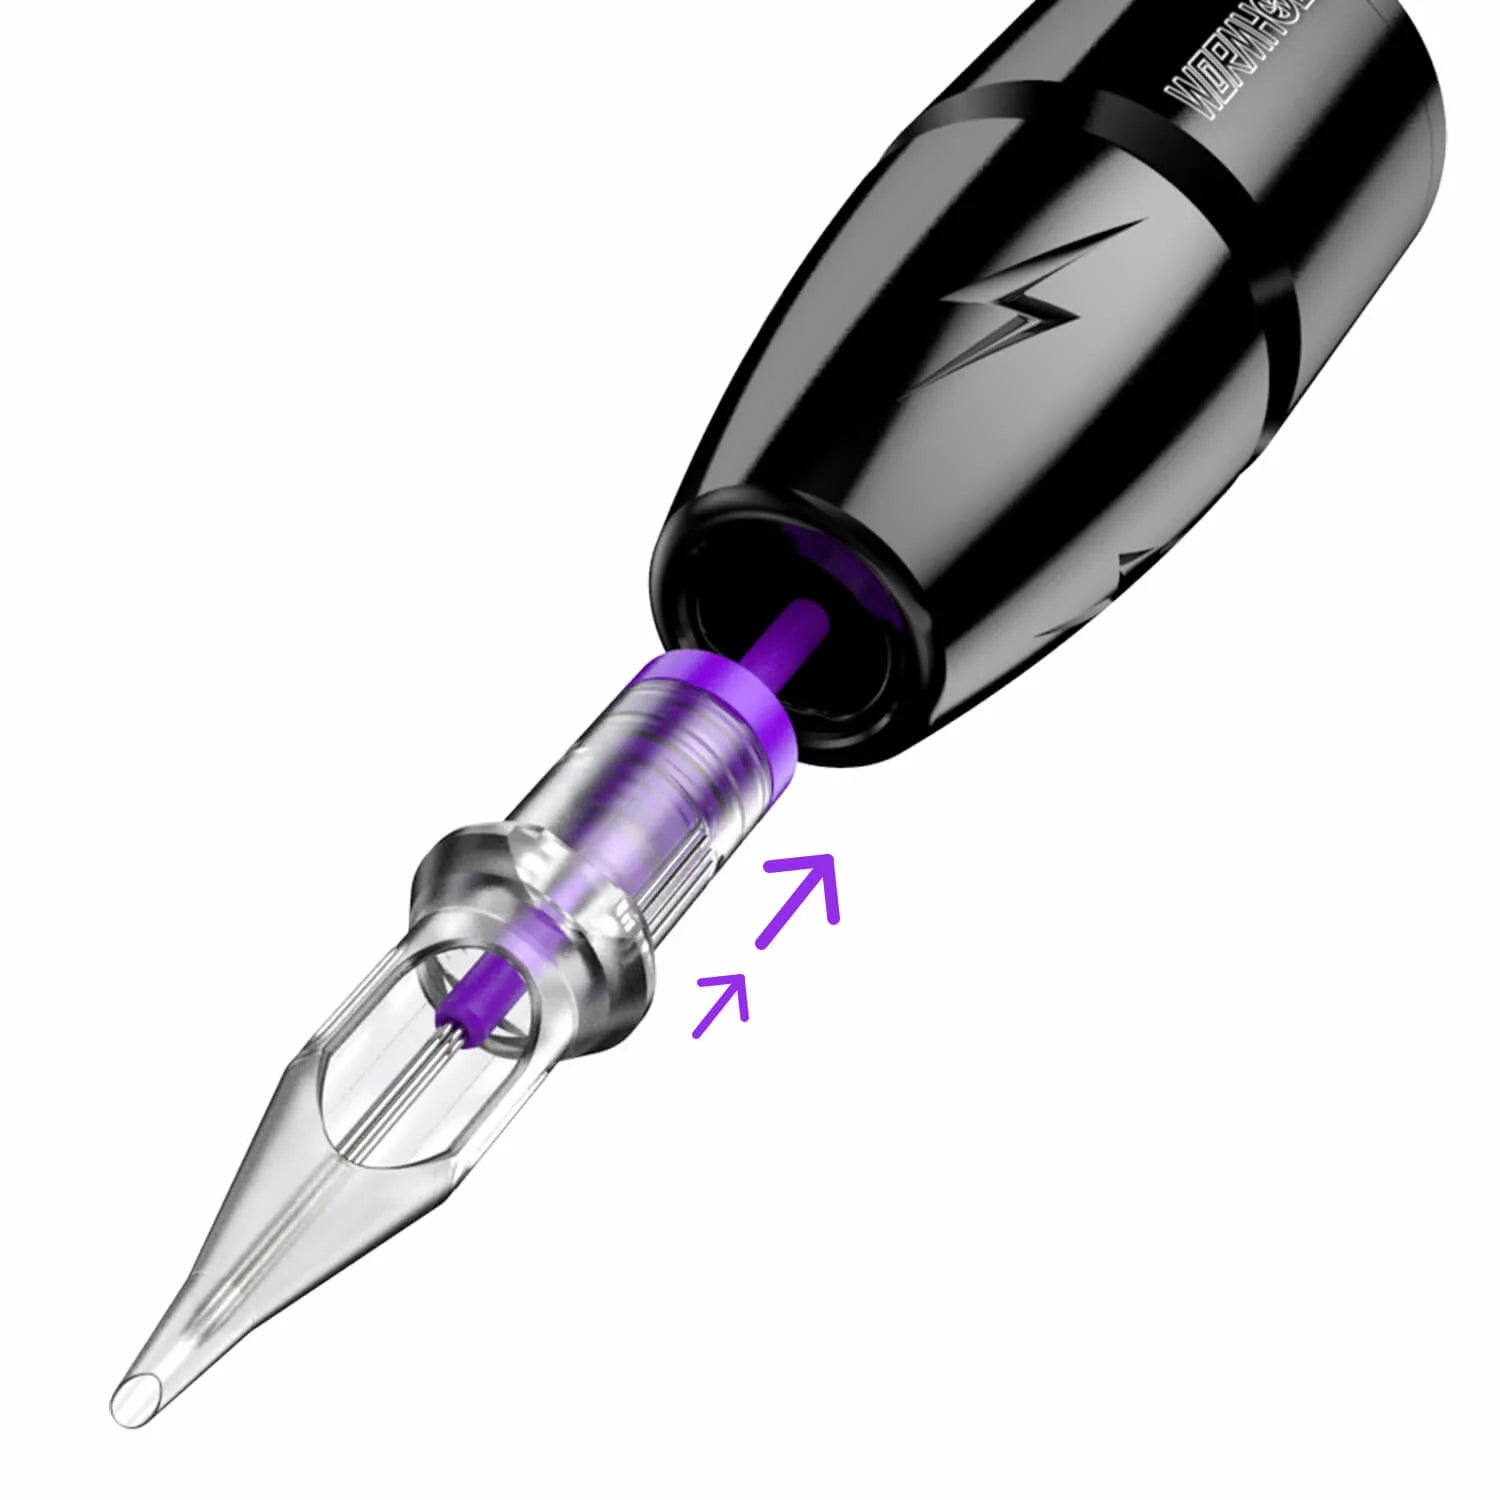 Tattoo Pen Called Flash with RCA Cord